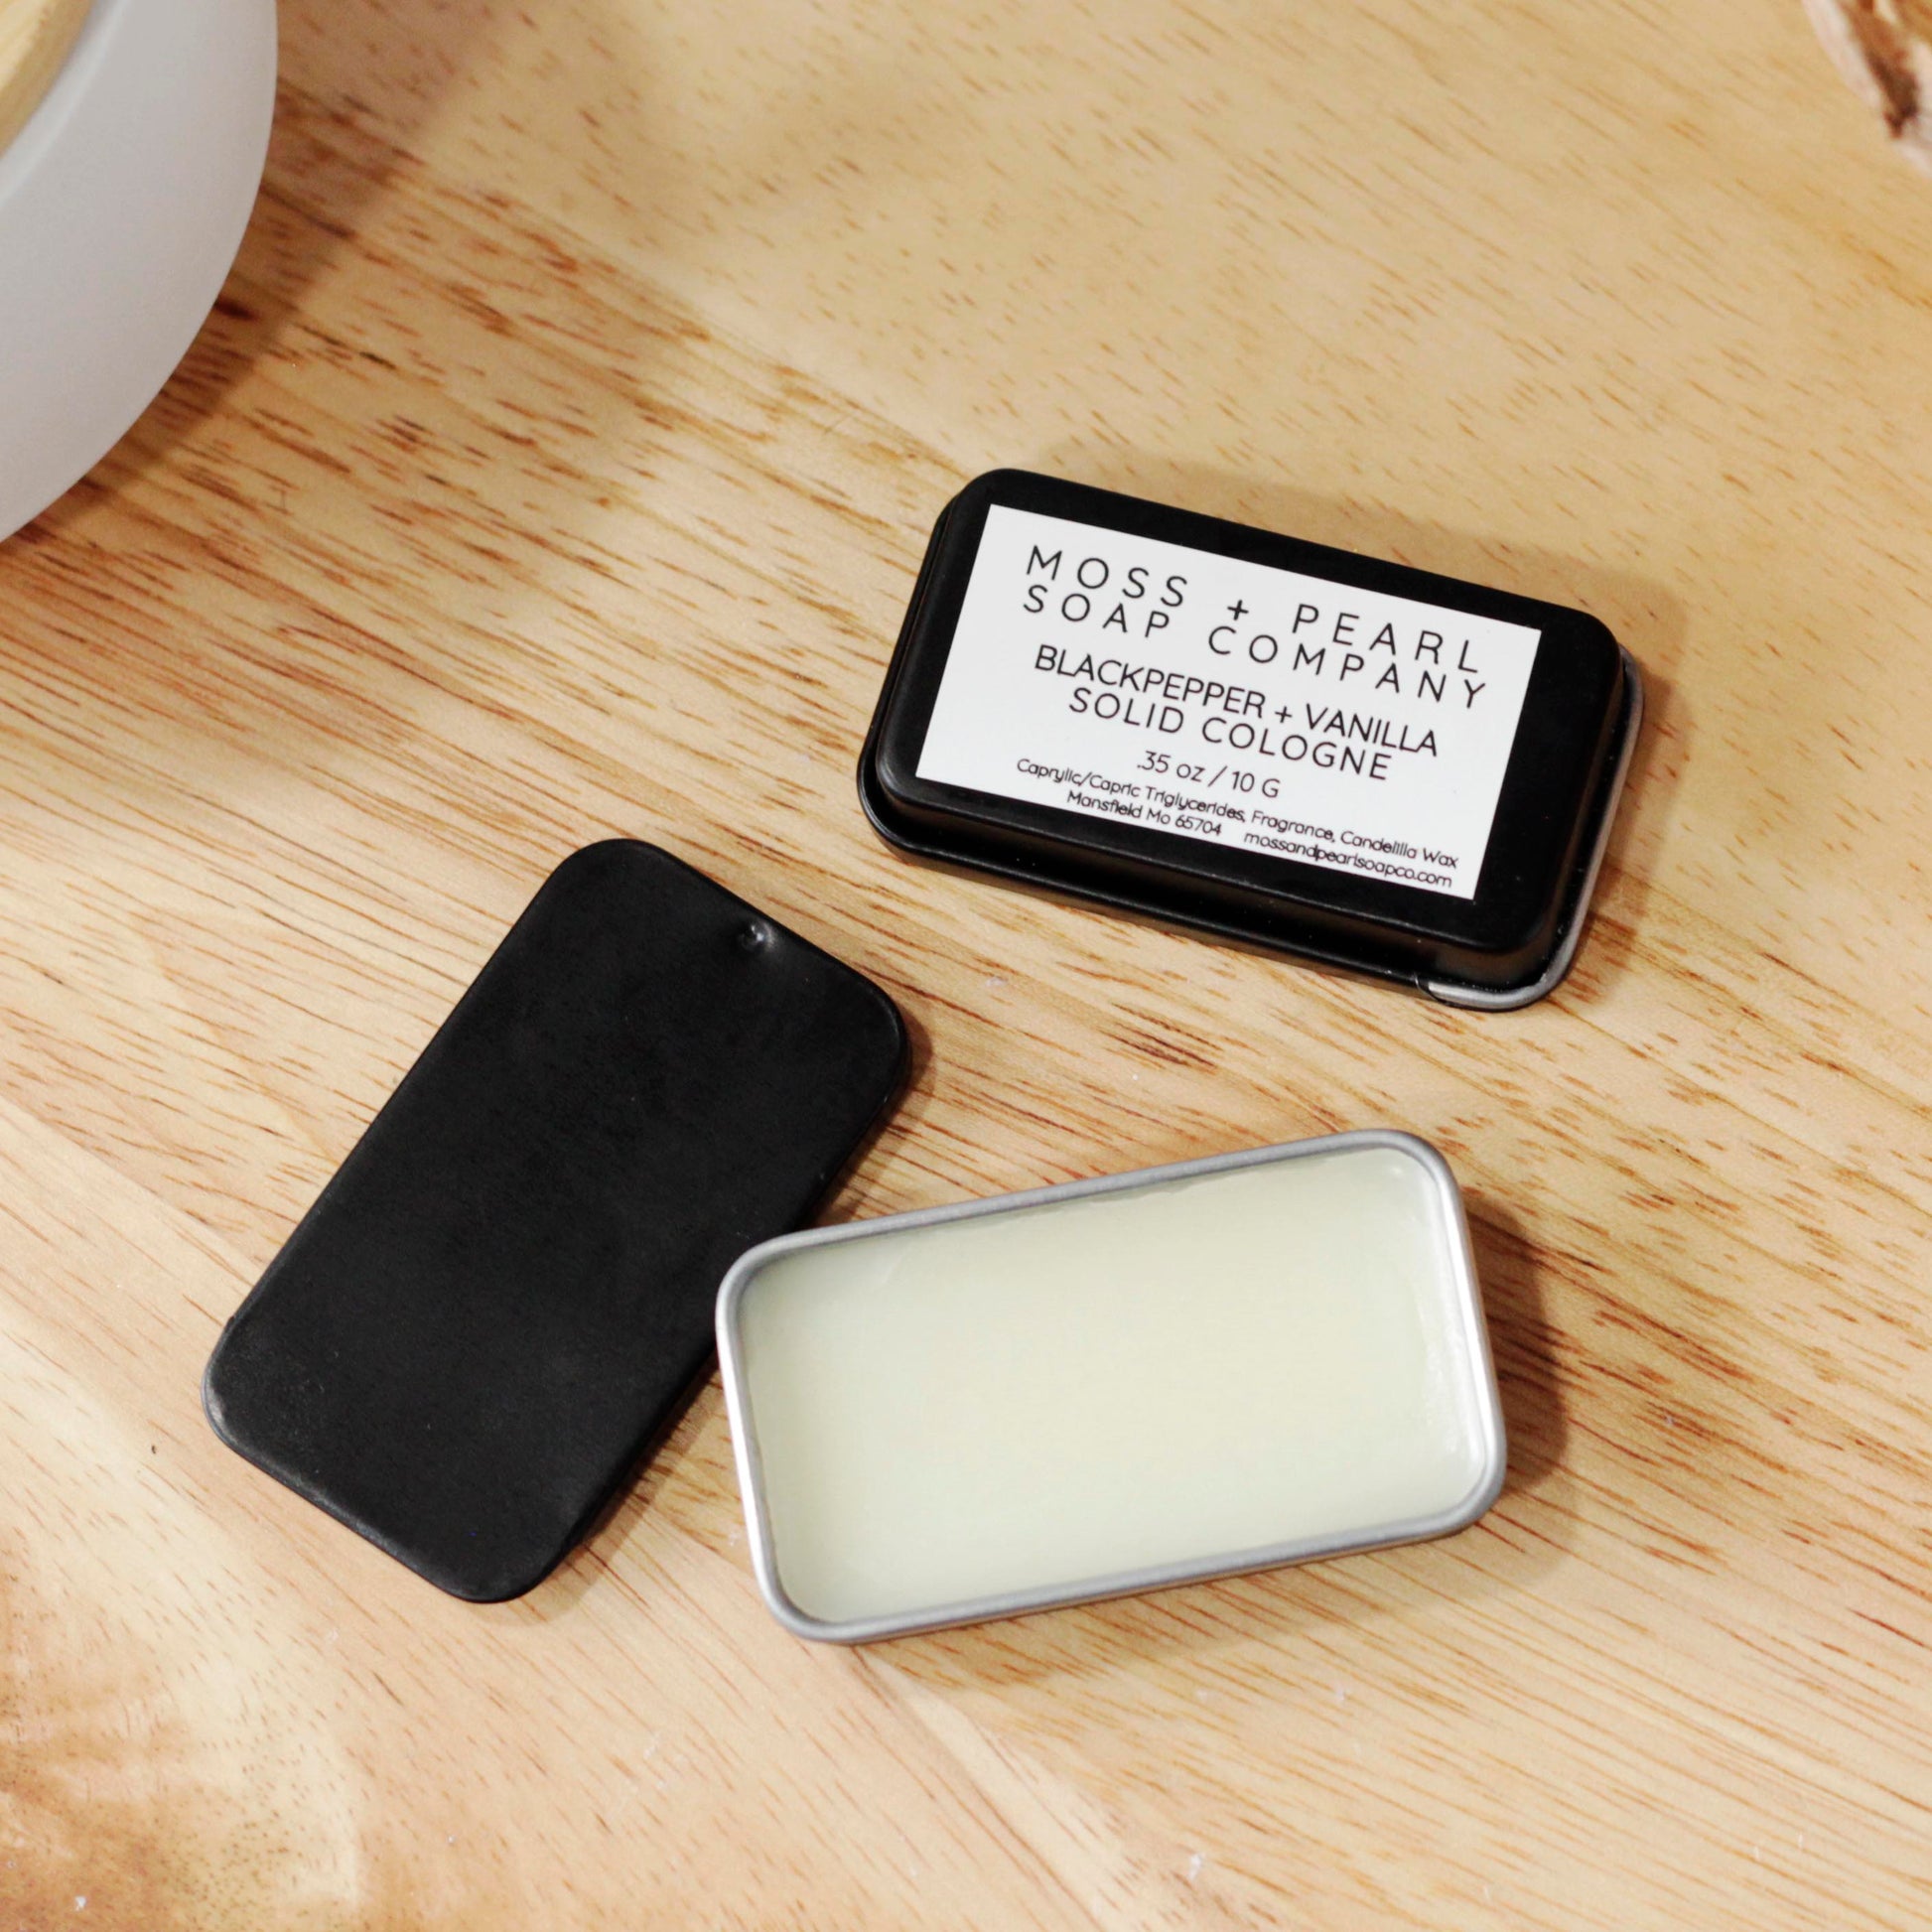 SOLID PERFUME + COLOGNE Moss + Pearl Soap Company